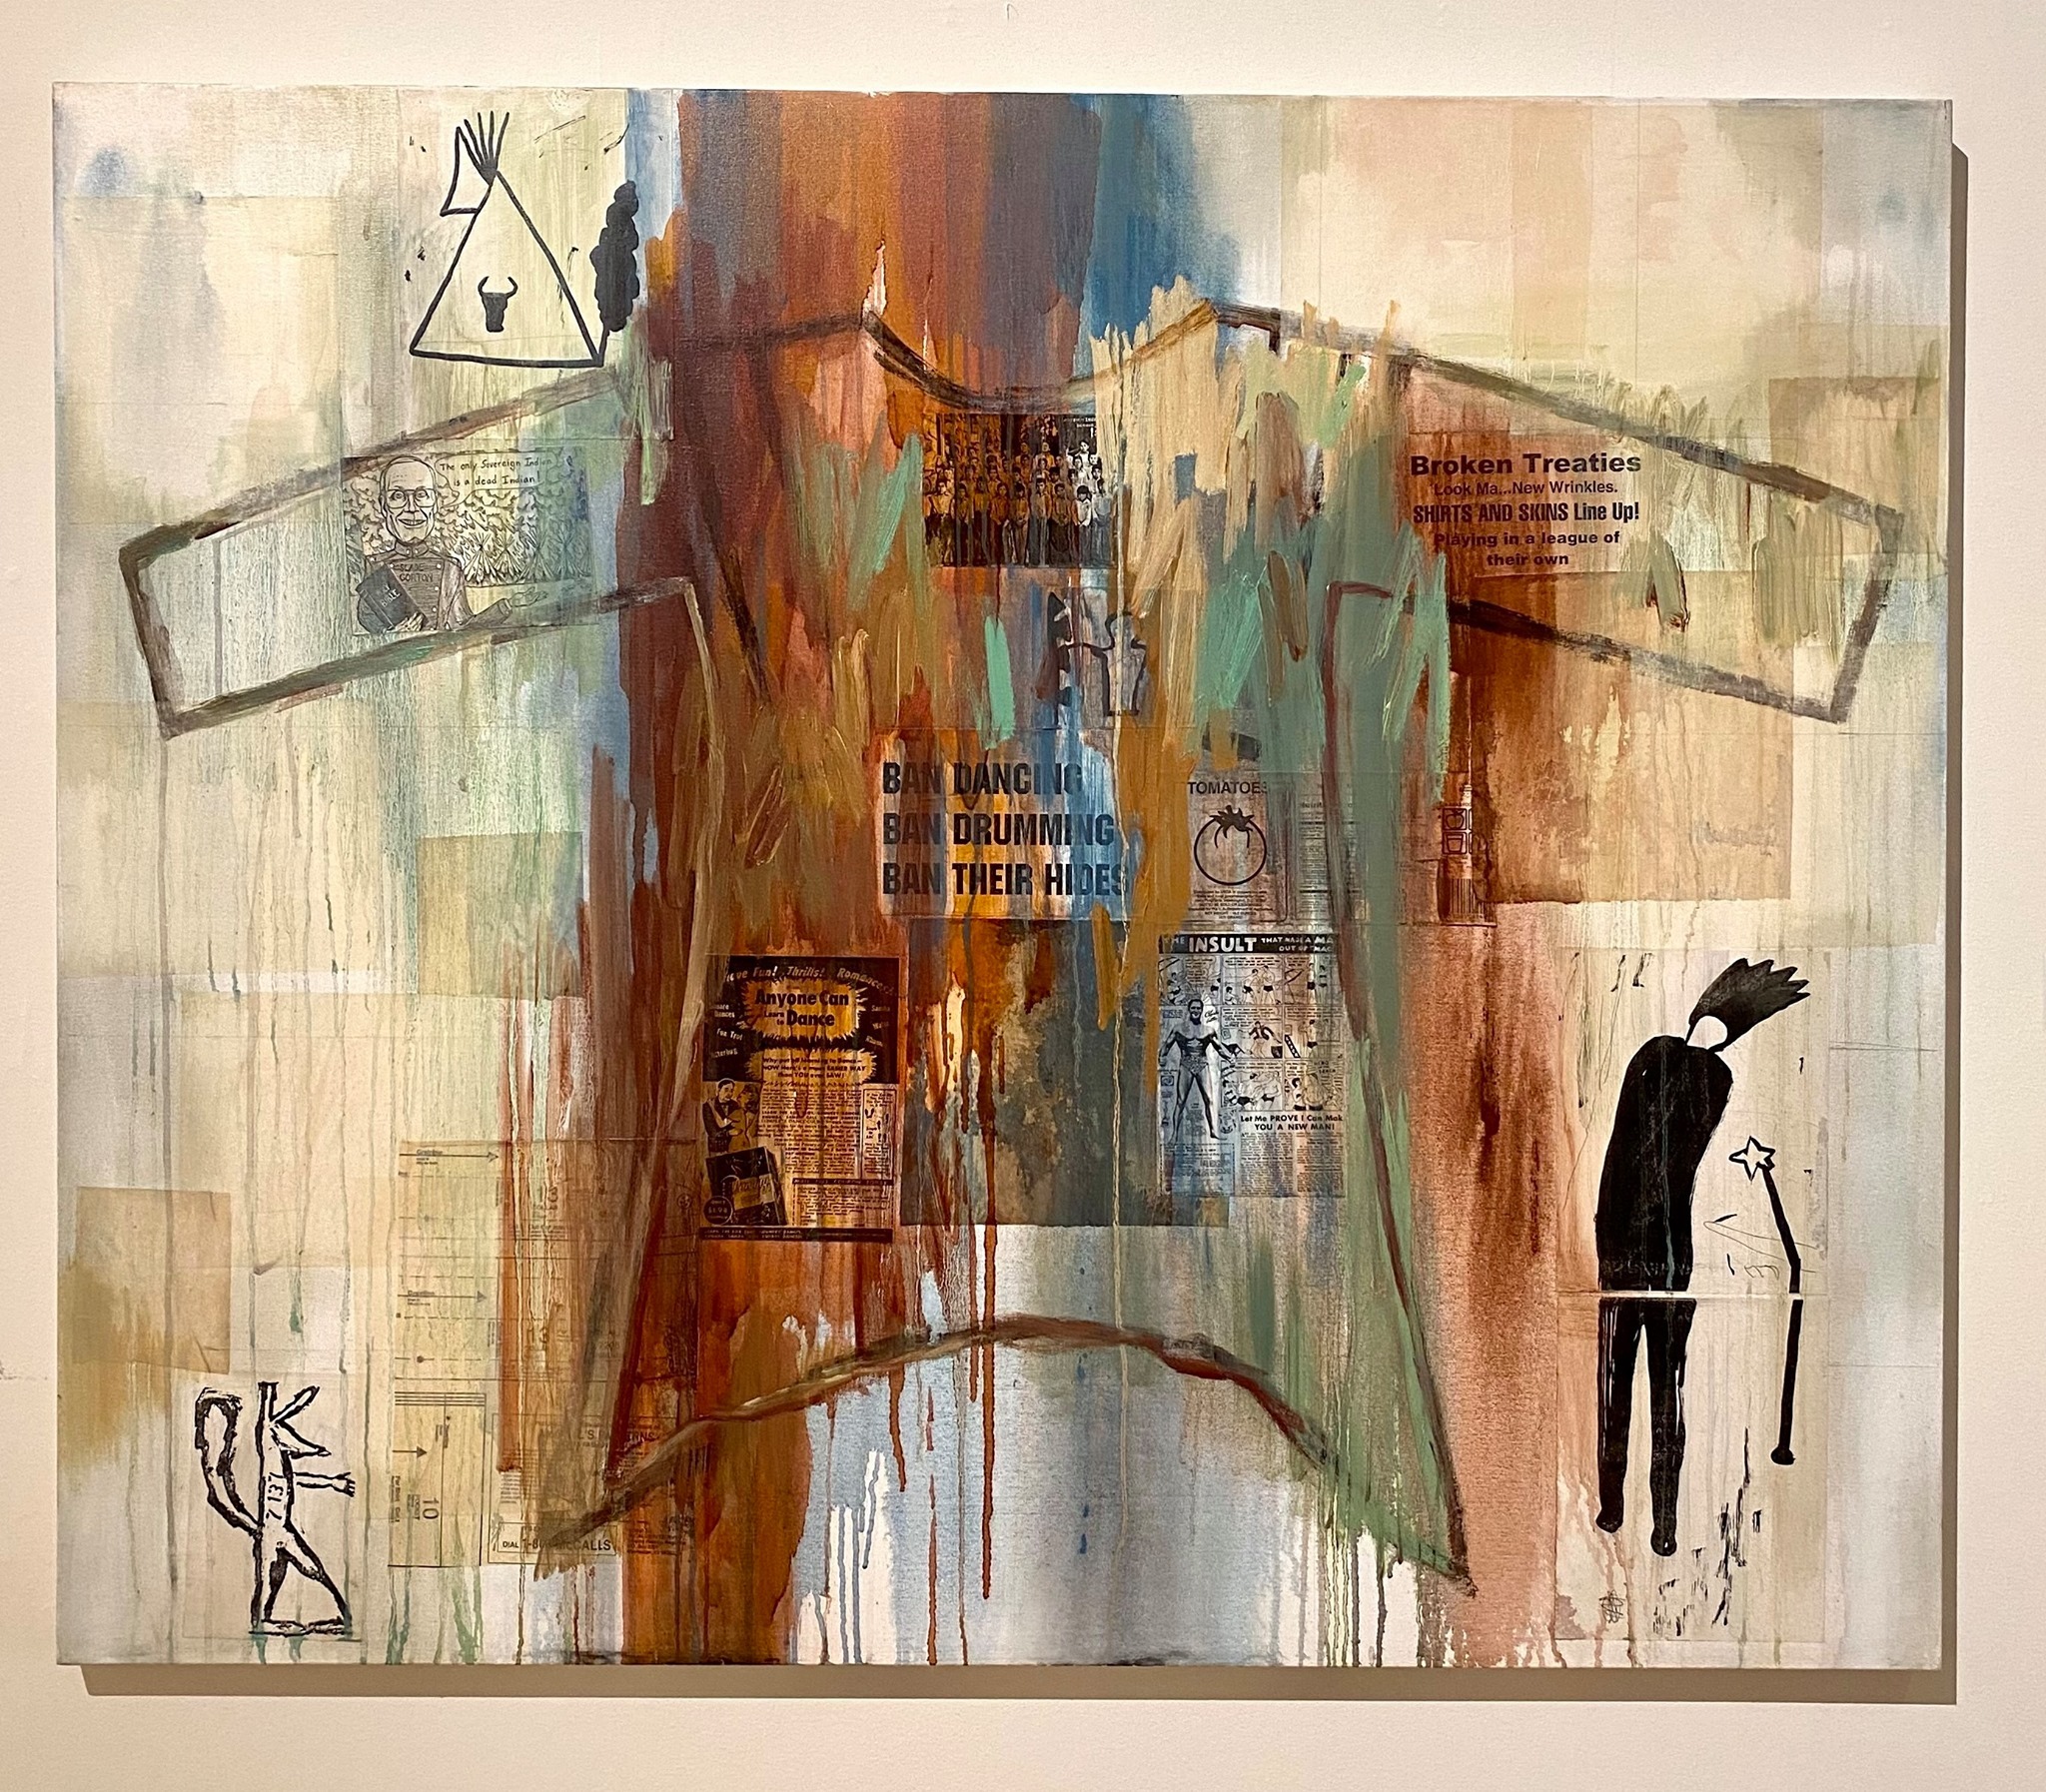 Jaune Quick-to-See Smith, <i>I See Red: Ban Dancing</i>, 1998, Mixed media on canvas, 50 × 60 × 1 in., General Purchase Fund and William and Bette Batchelor Memorial Acquisition Fund